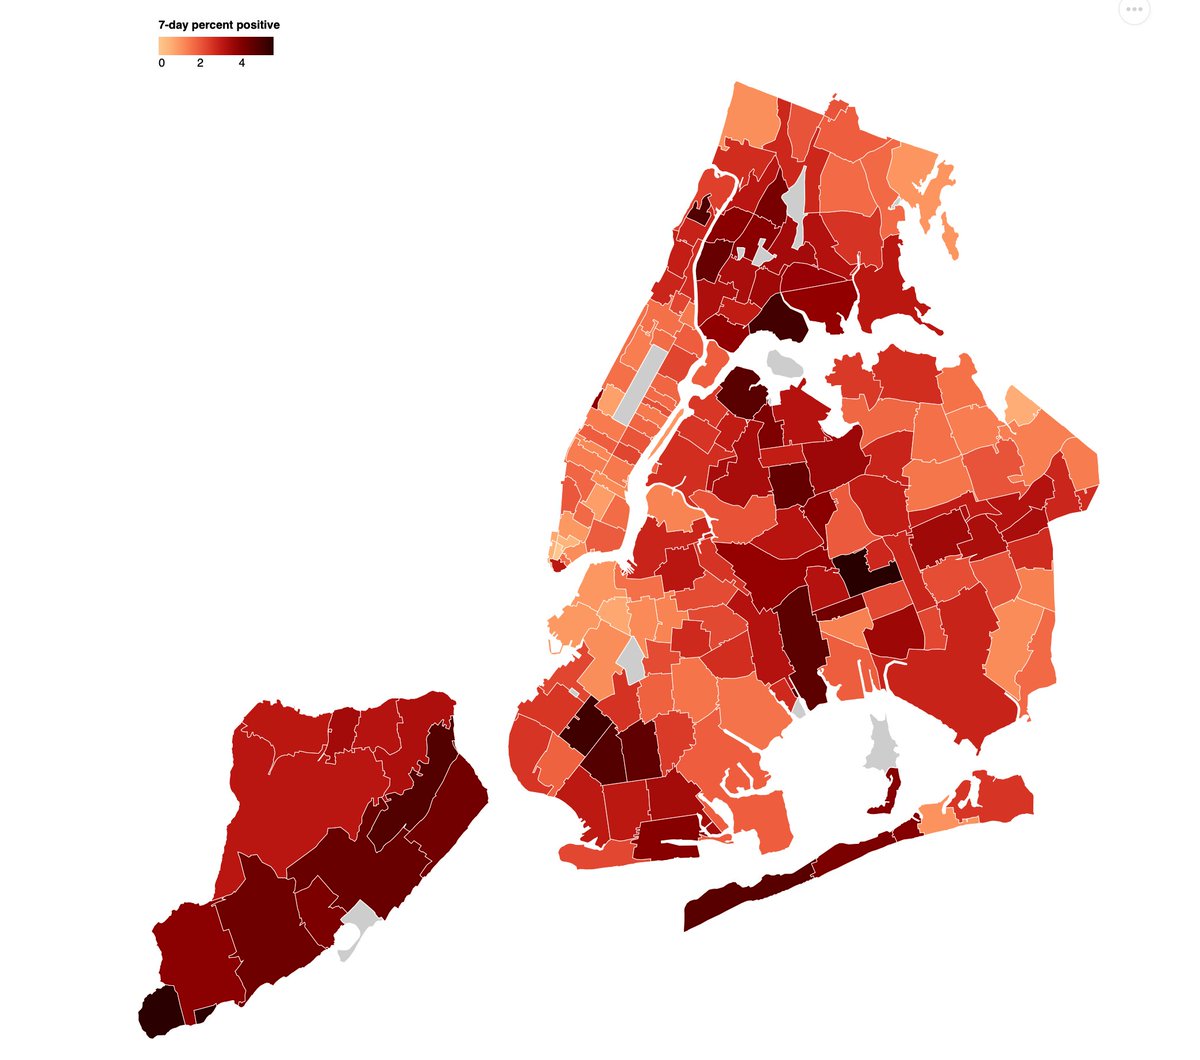 In NYC, northern part of Staten Island generally has the worst health status, but the southern part is having a large Covid outbreak. Support for Trump and lack of safety precautions against the virus are highly correlated. Article describing dynamics.  https://nyti.ms/3eWnJx2  6/